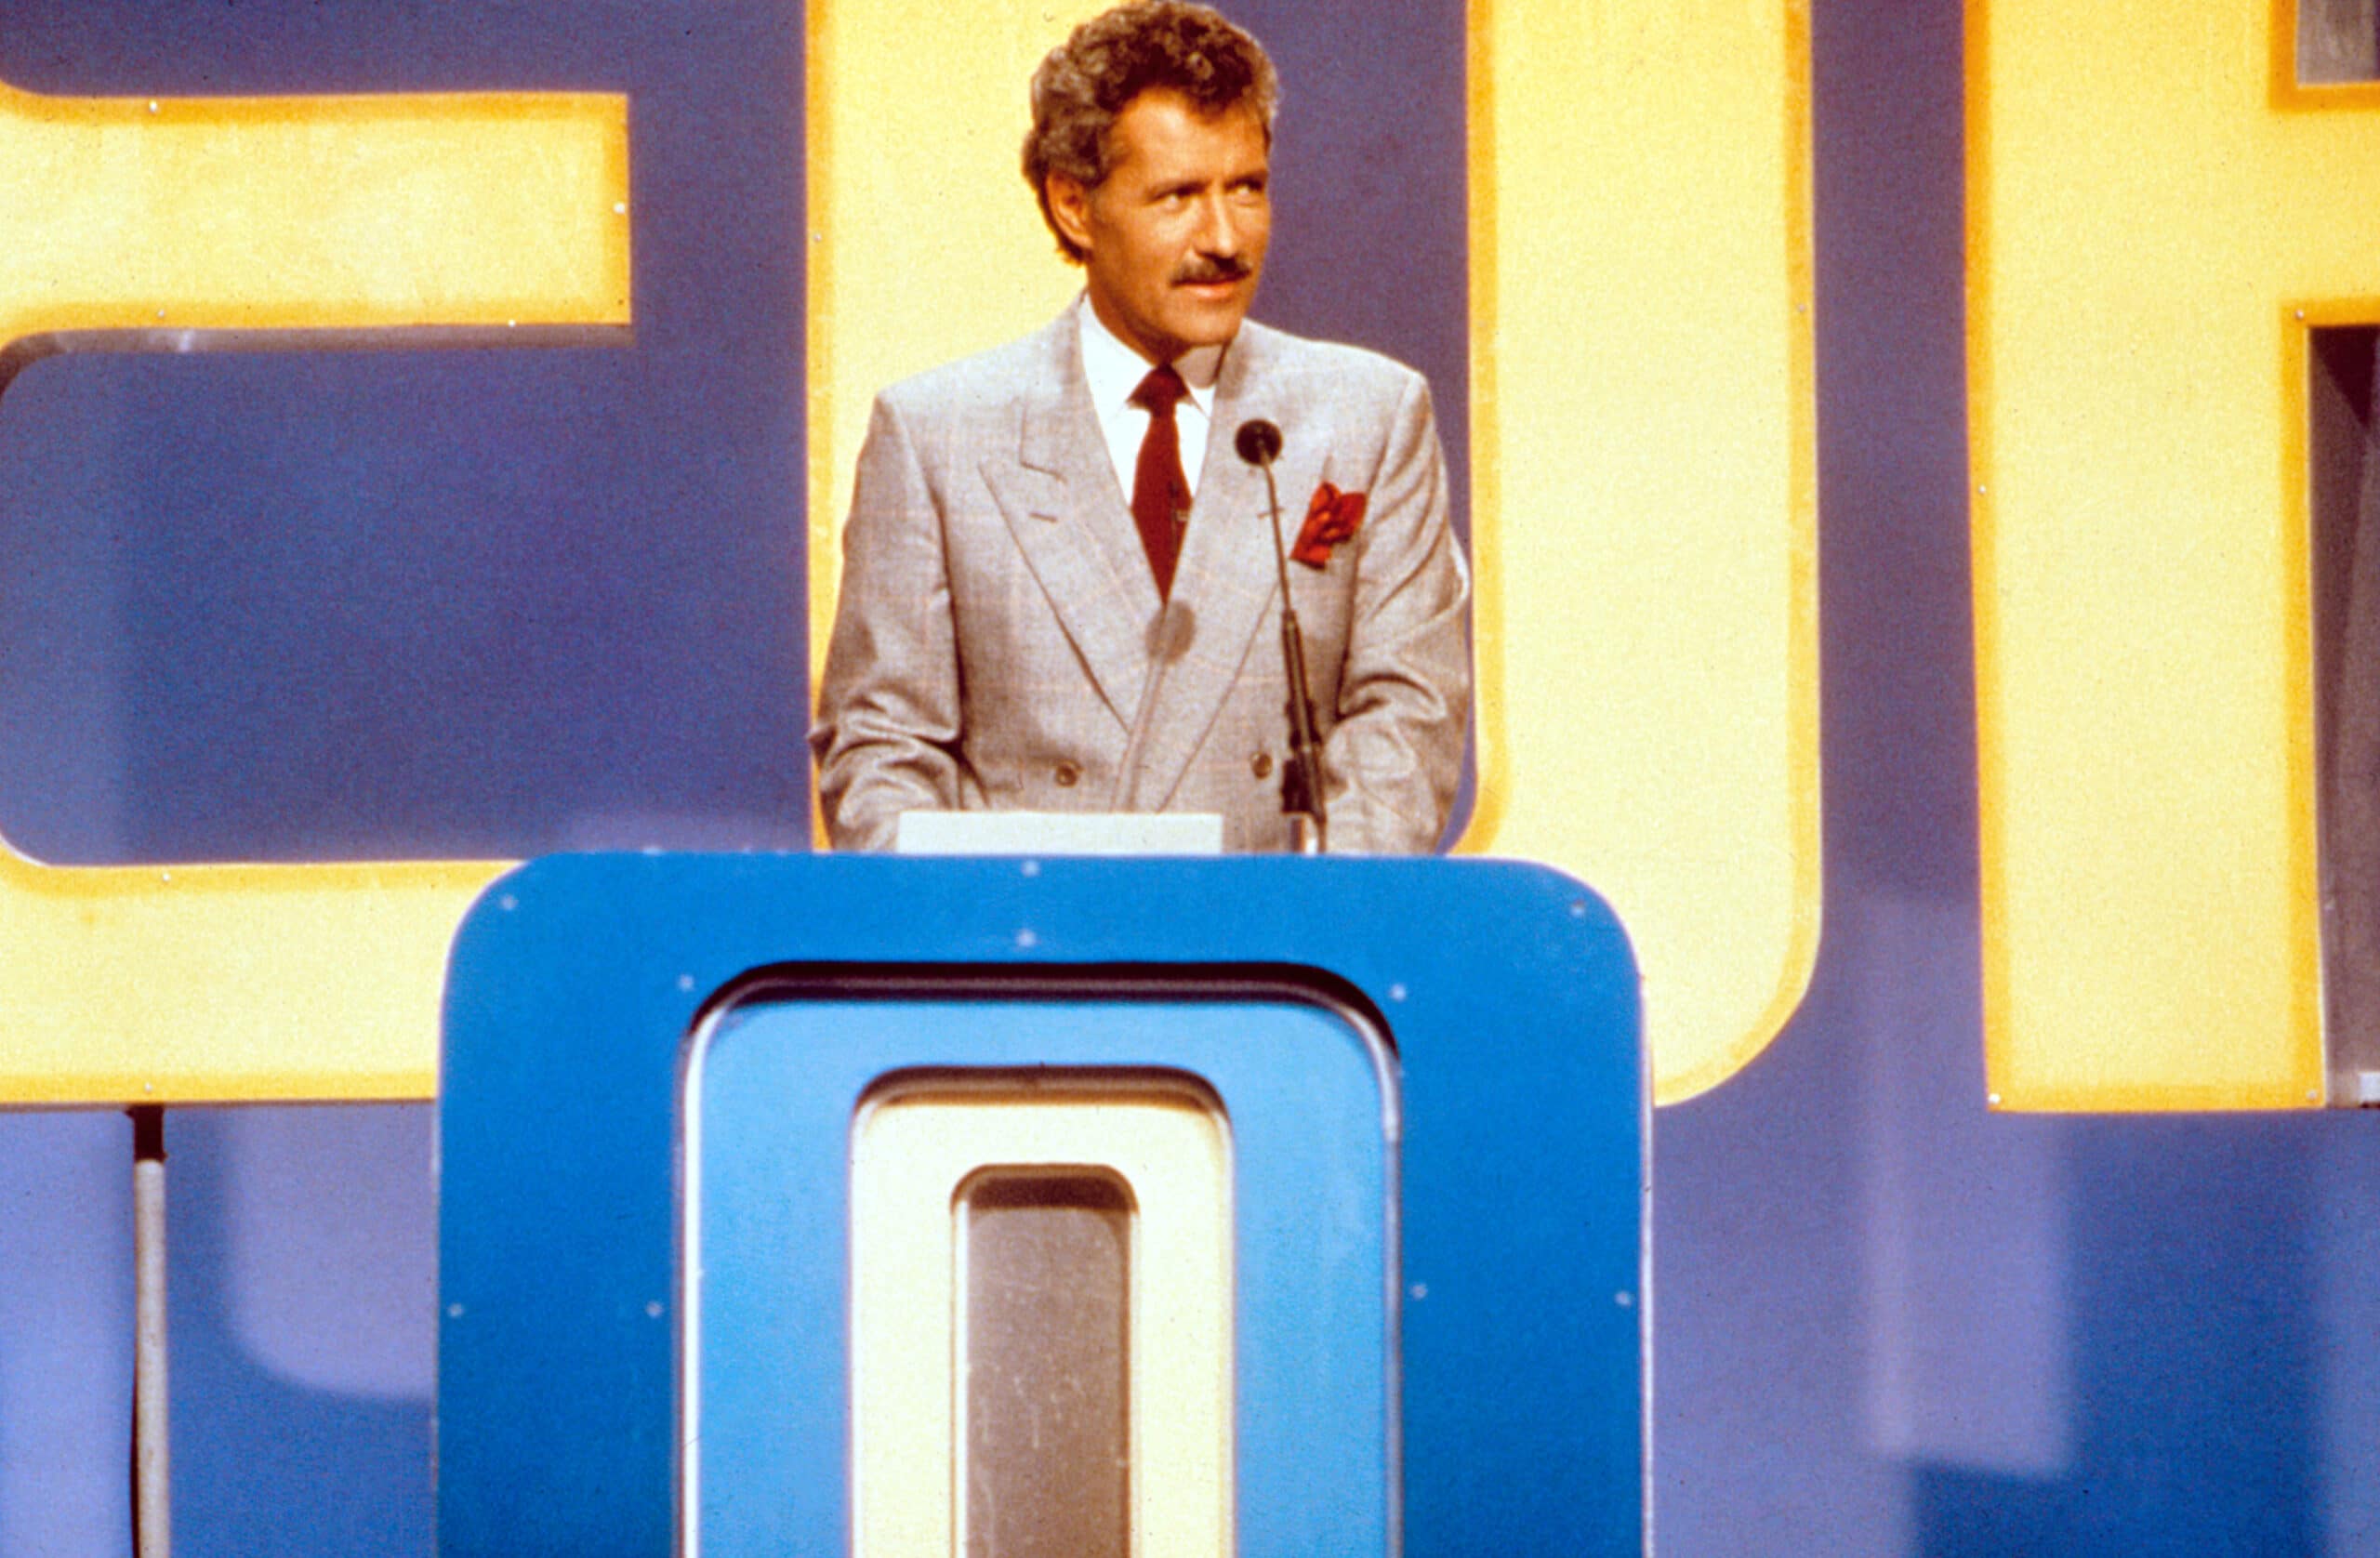 'Wheel Of Fortune' Hosts Pat Sajak And Vanna White Remember Late Friend Alex Trebek